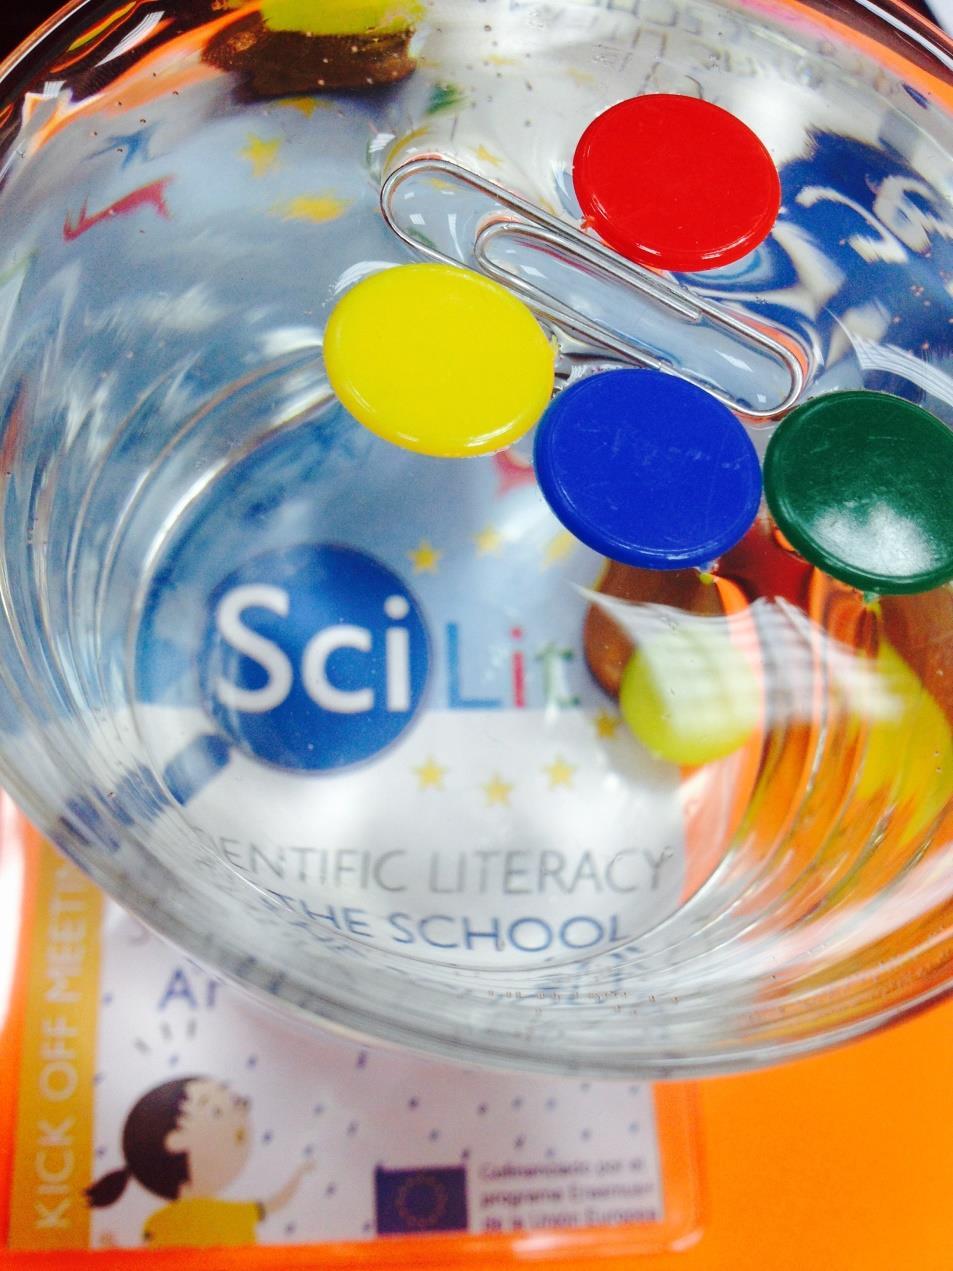 The SciLit materials the Guide fr plicy makers, scientists, educatin prfessinals and natinal, reginal, lcal authrities invlved in science educatin an educatinal itinerary t facilitate understanding f